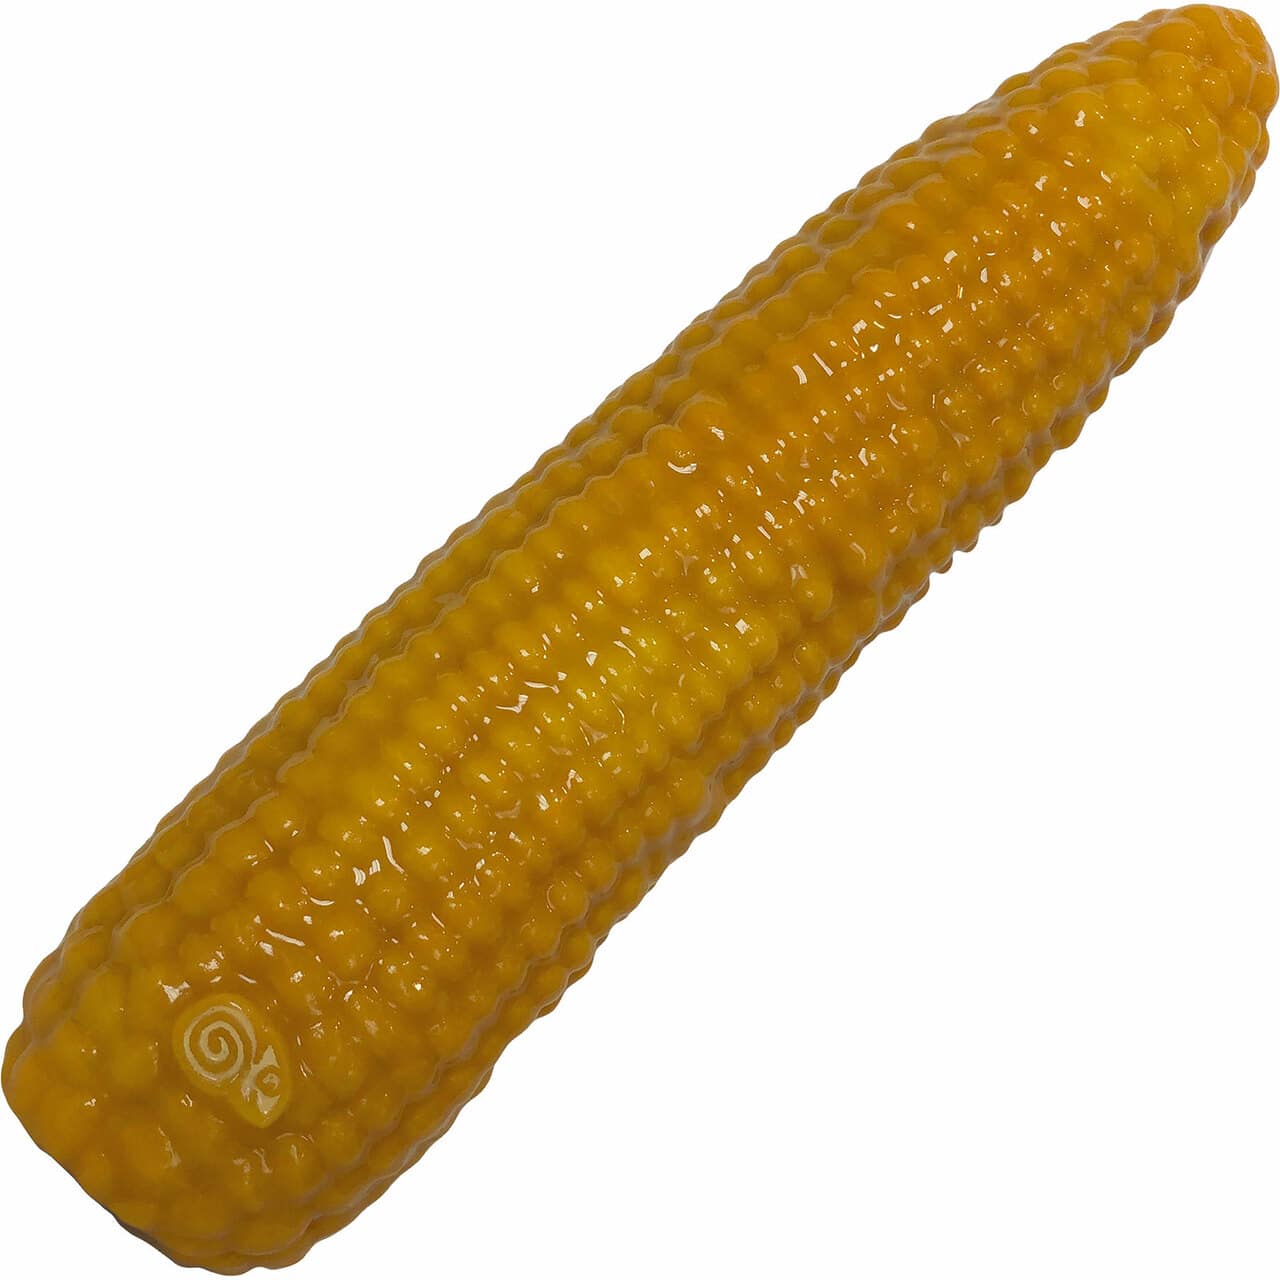 Corn On The Cob Silicone Dildo By SelfDelve